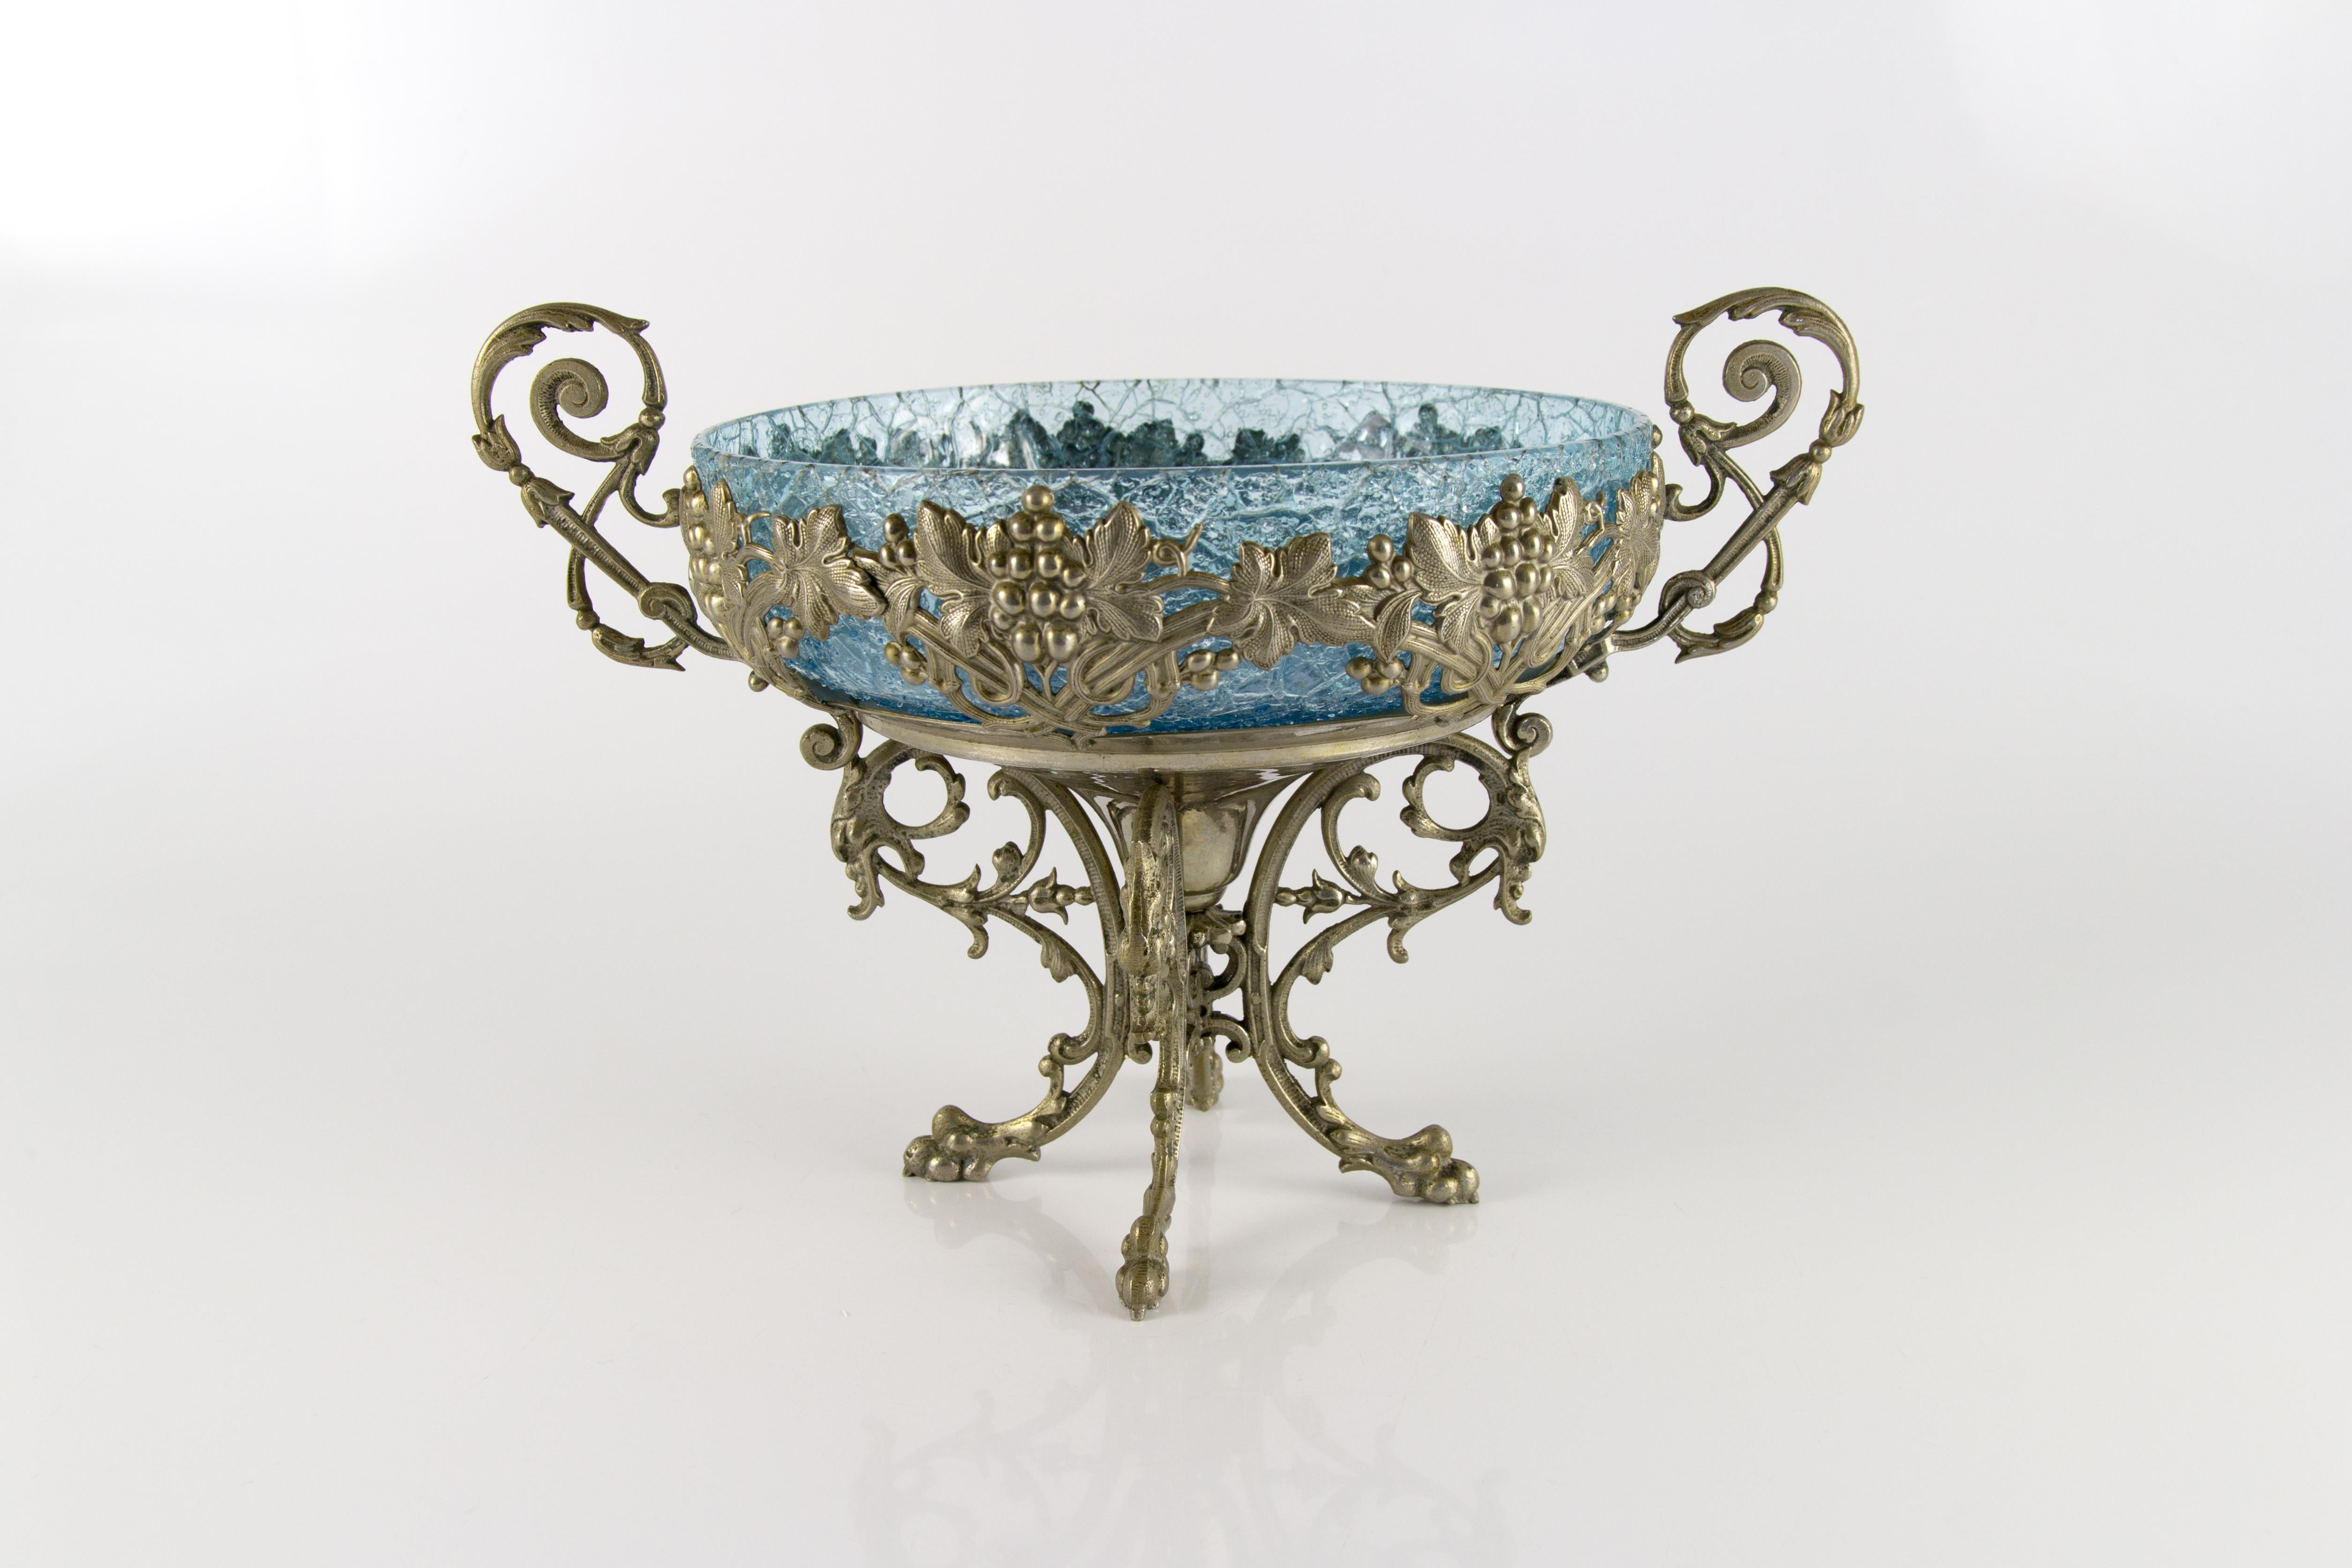 Neoclassical Crackle Glass Centerpiece Bowl with Ornate Stand